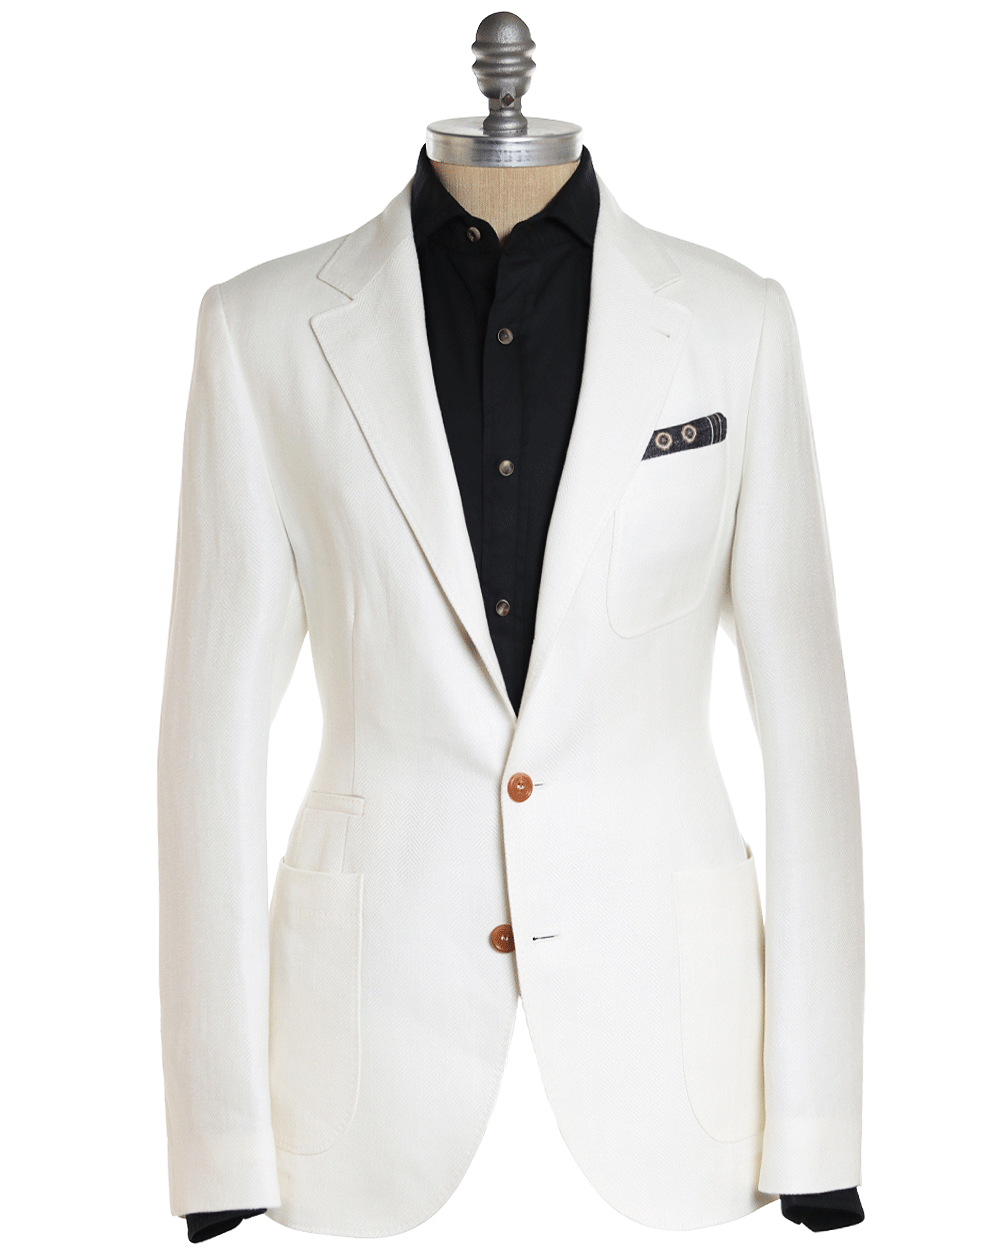 Off White Donegal Chevron Sportcoat